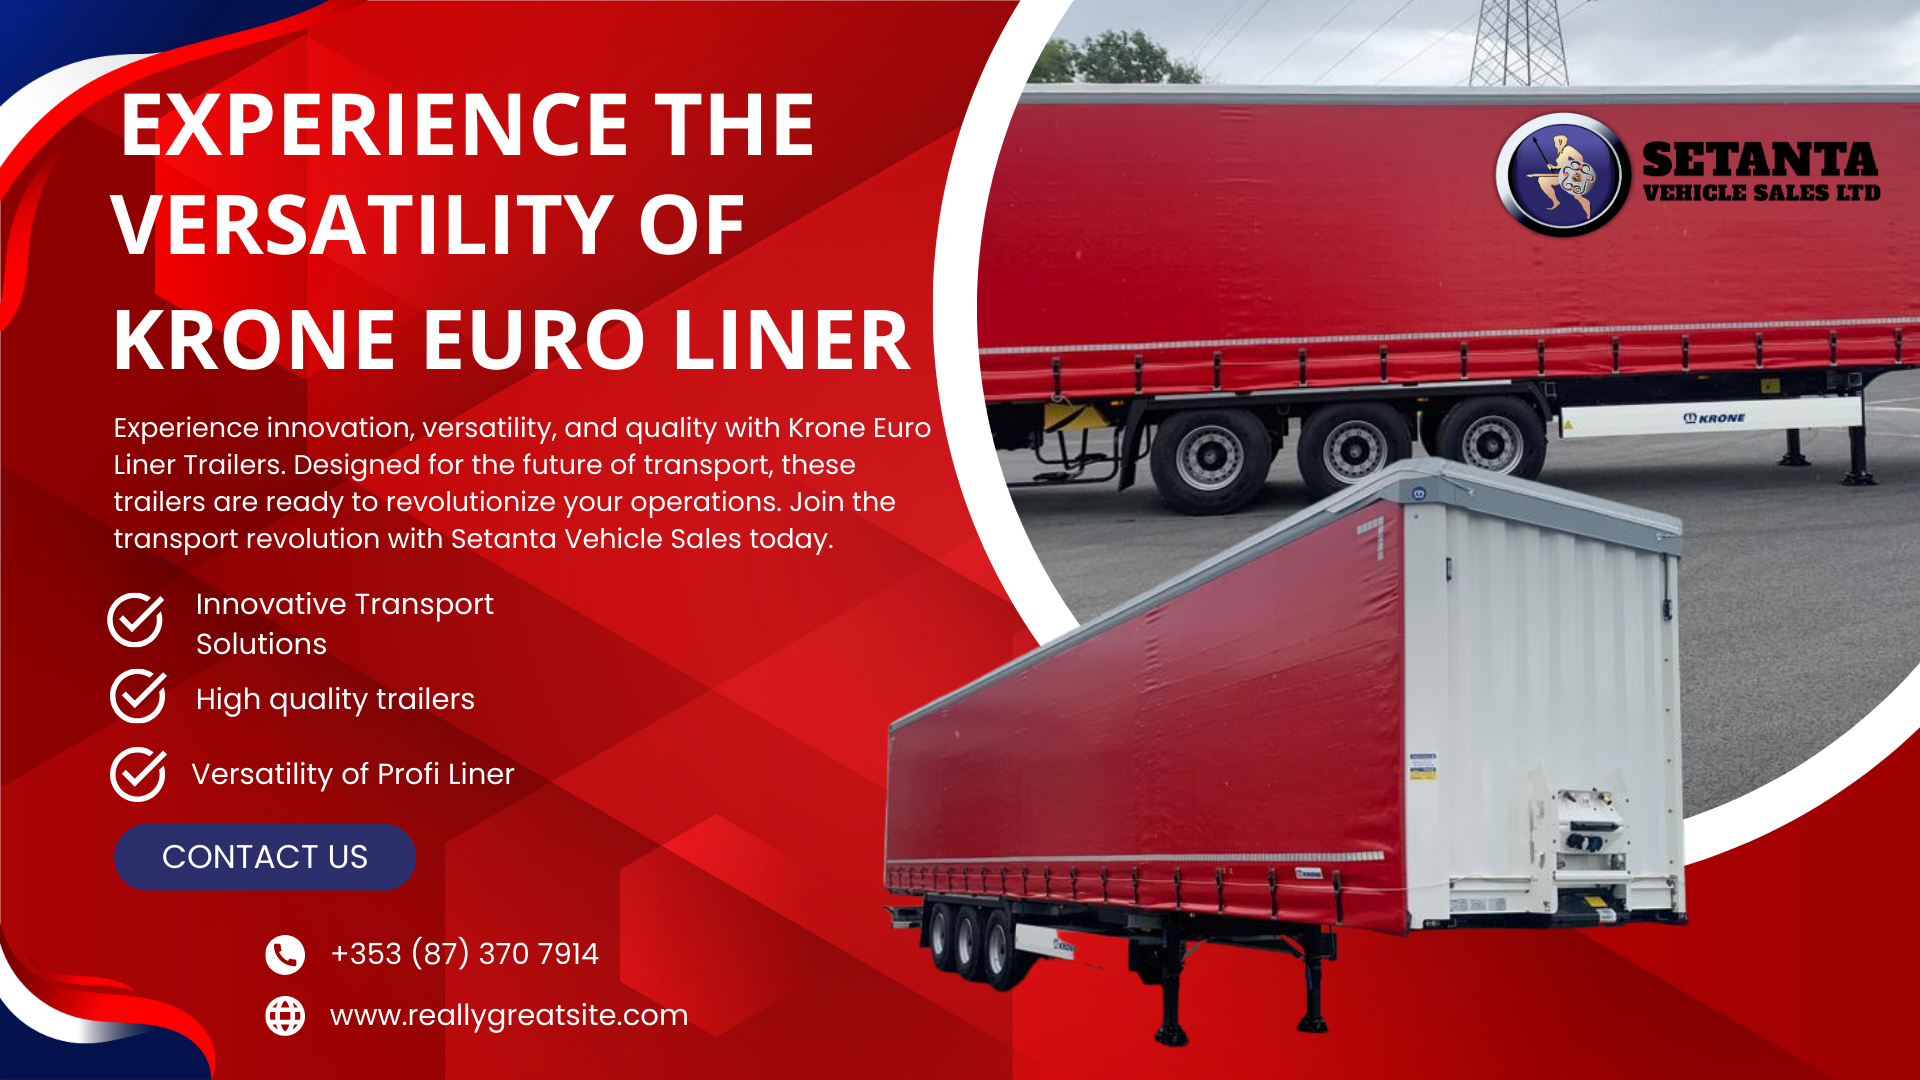 Discover the Superior Features and Benefits of the New Krone Euro Liner Trailers